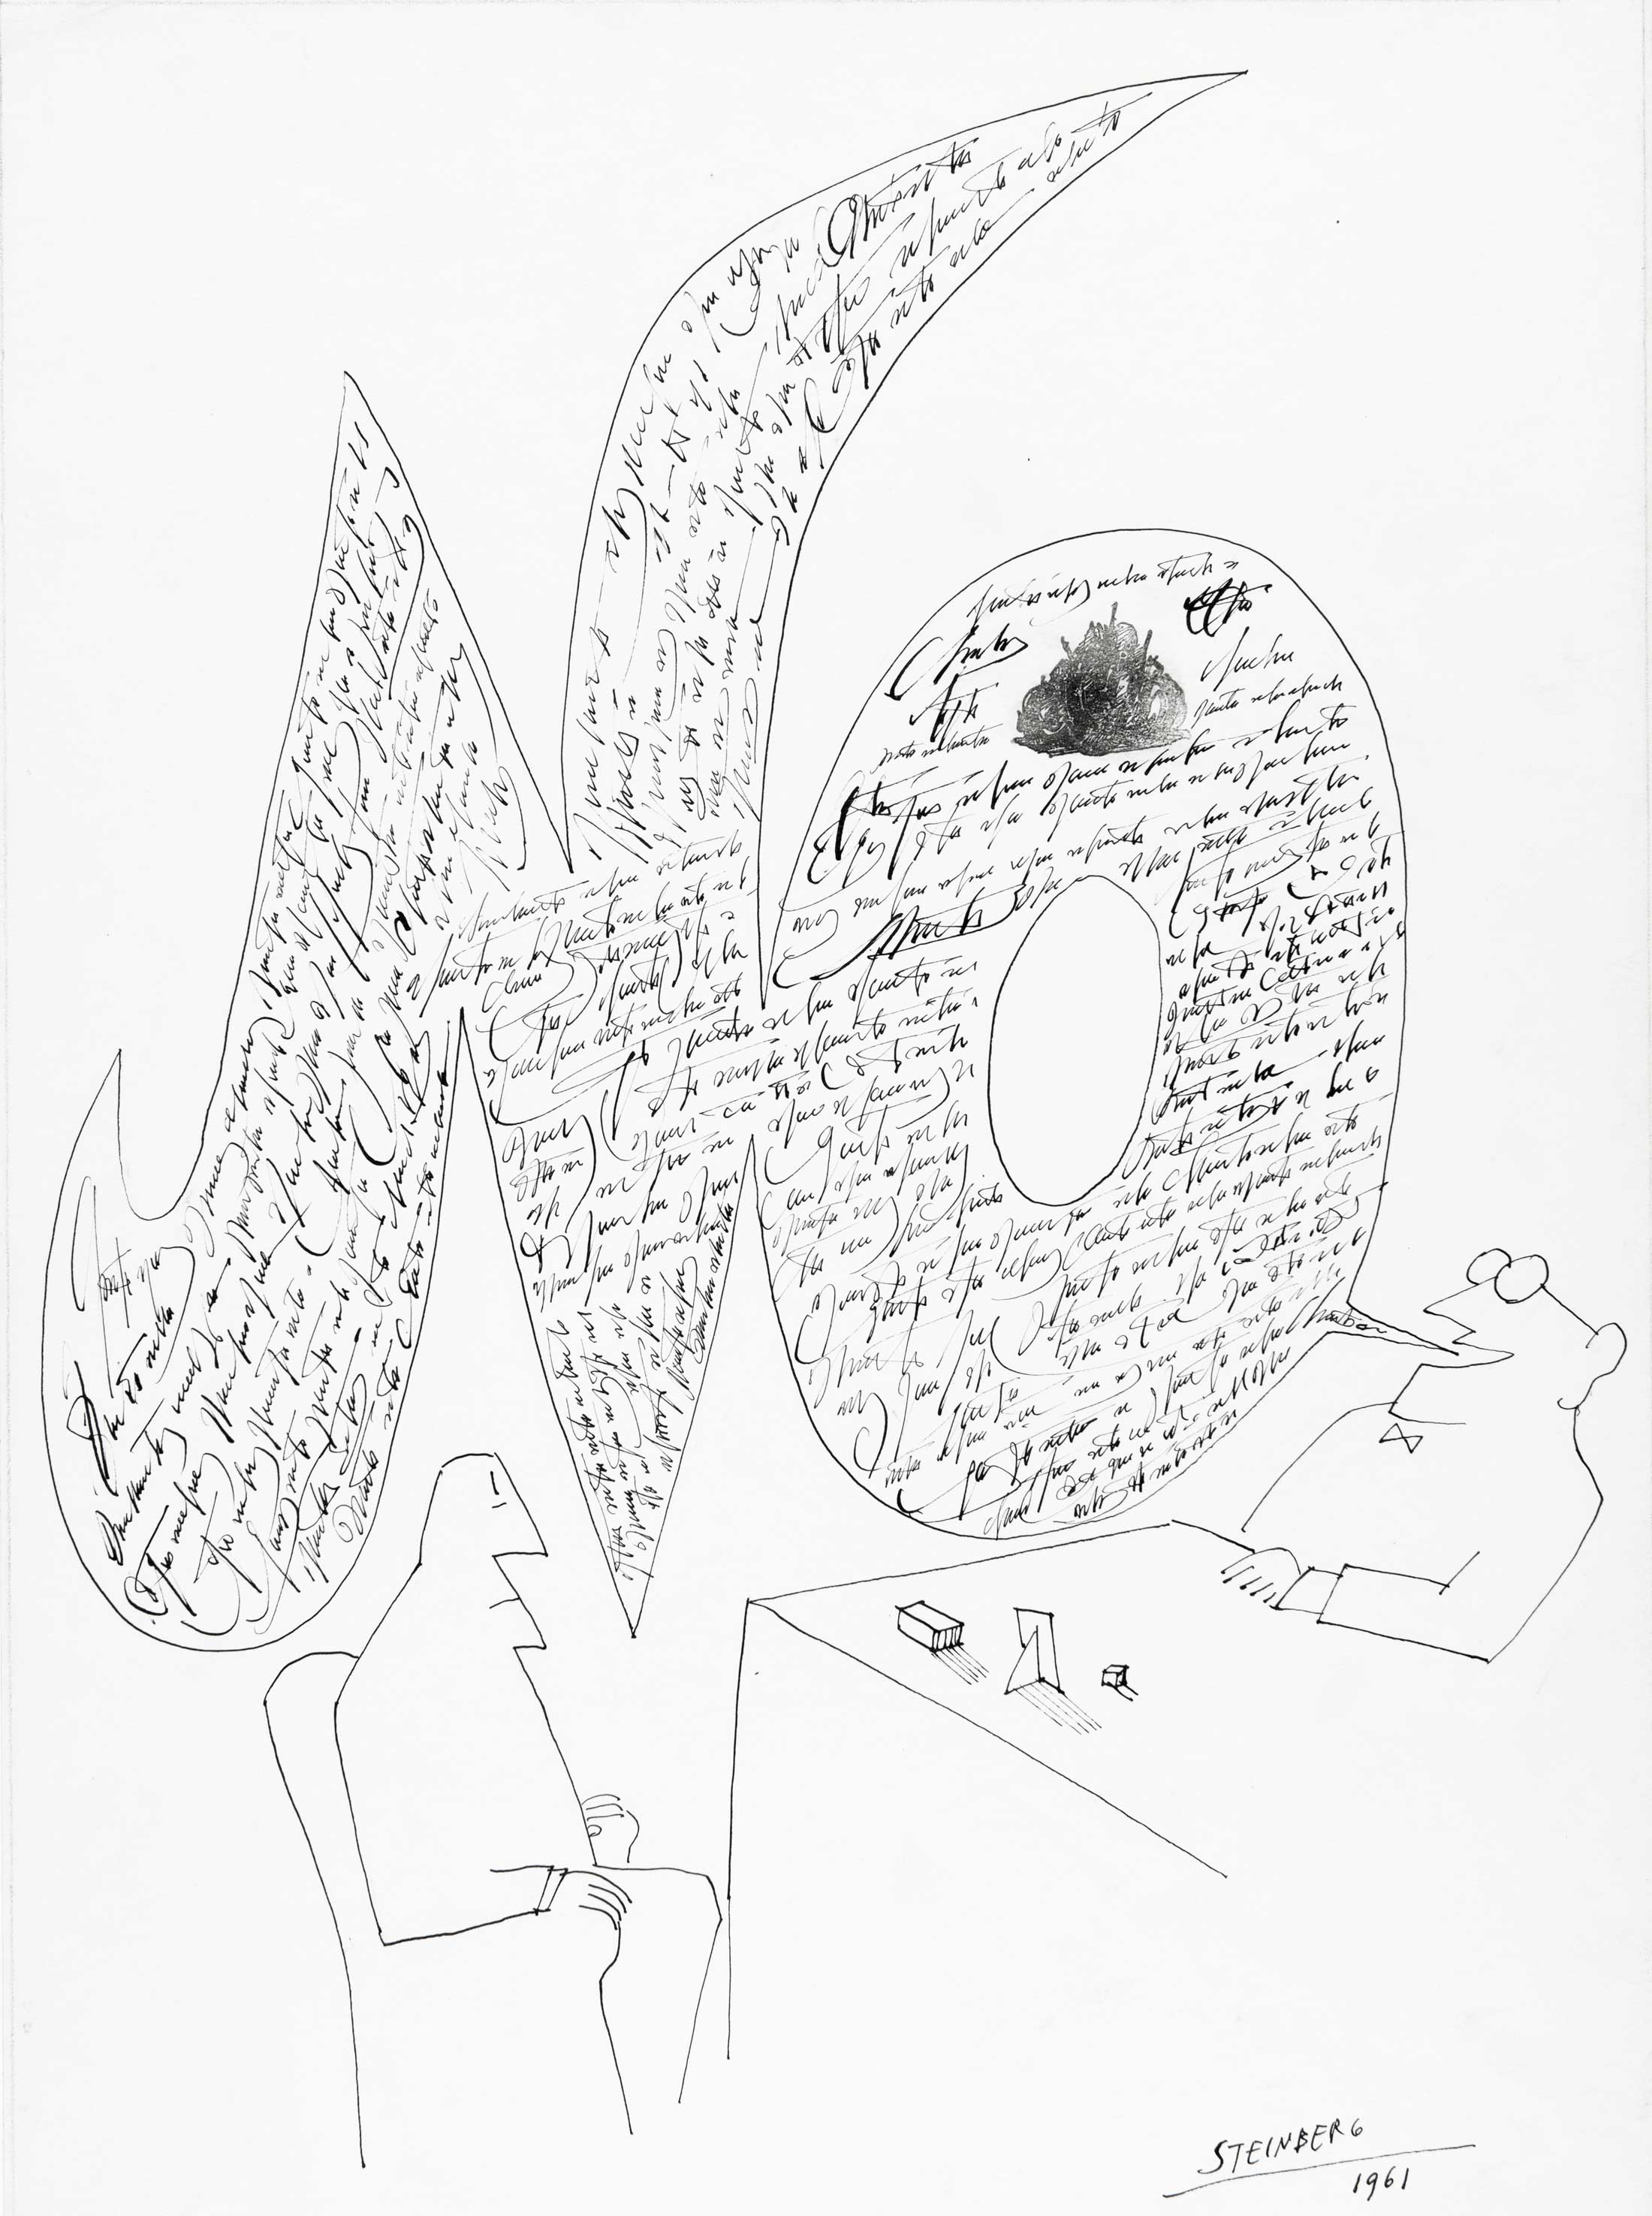 <em>Untitled</em>, 1961. Ink, pencil, and rubber stamps on paper, 22 7/8 x 14 ½ in. Private collection.